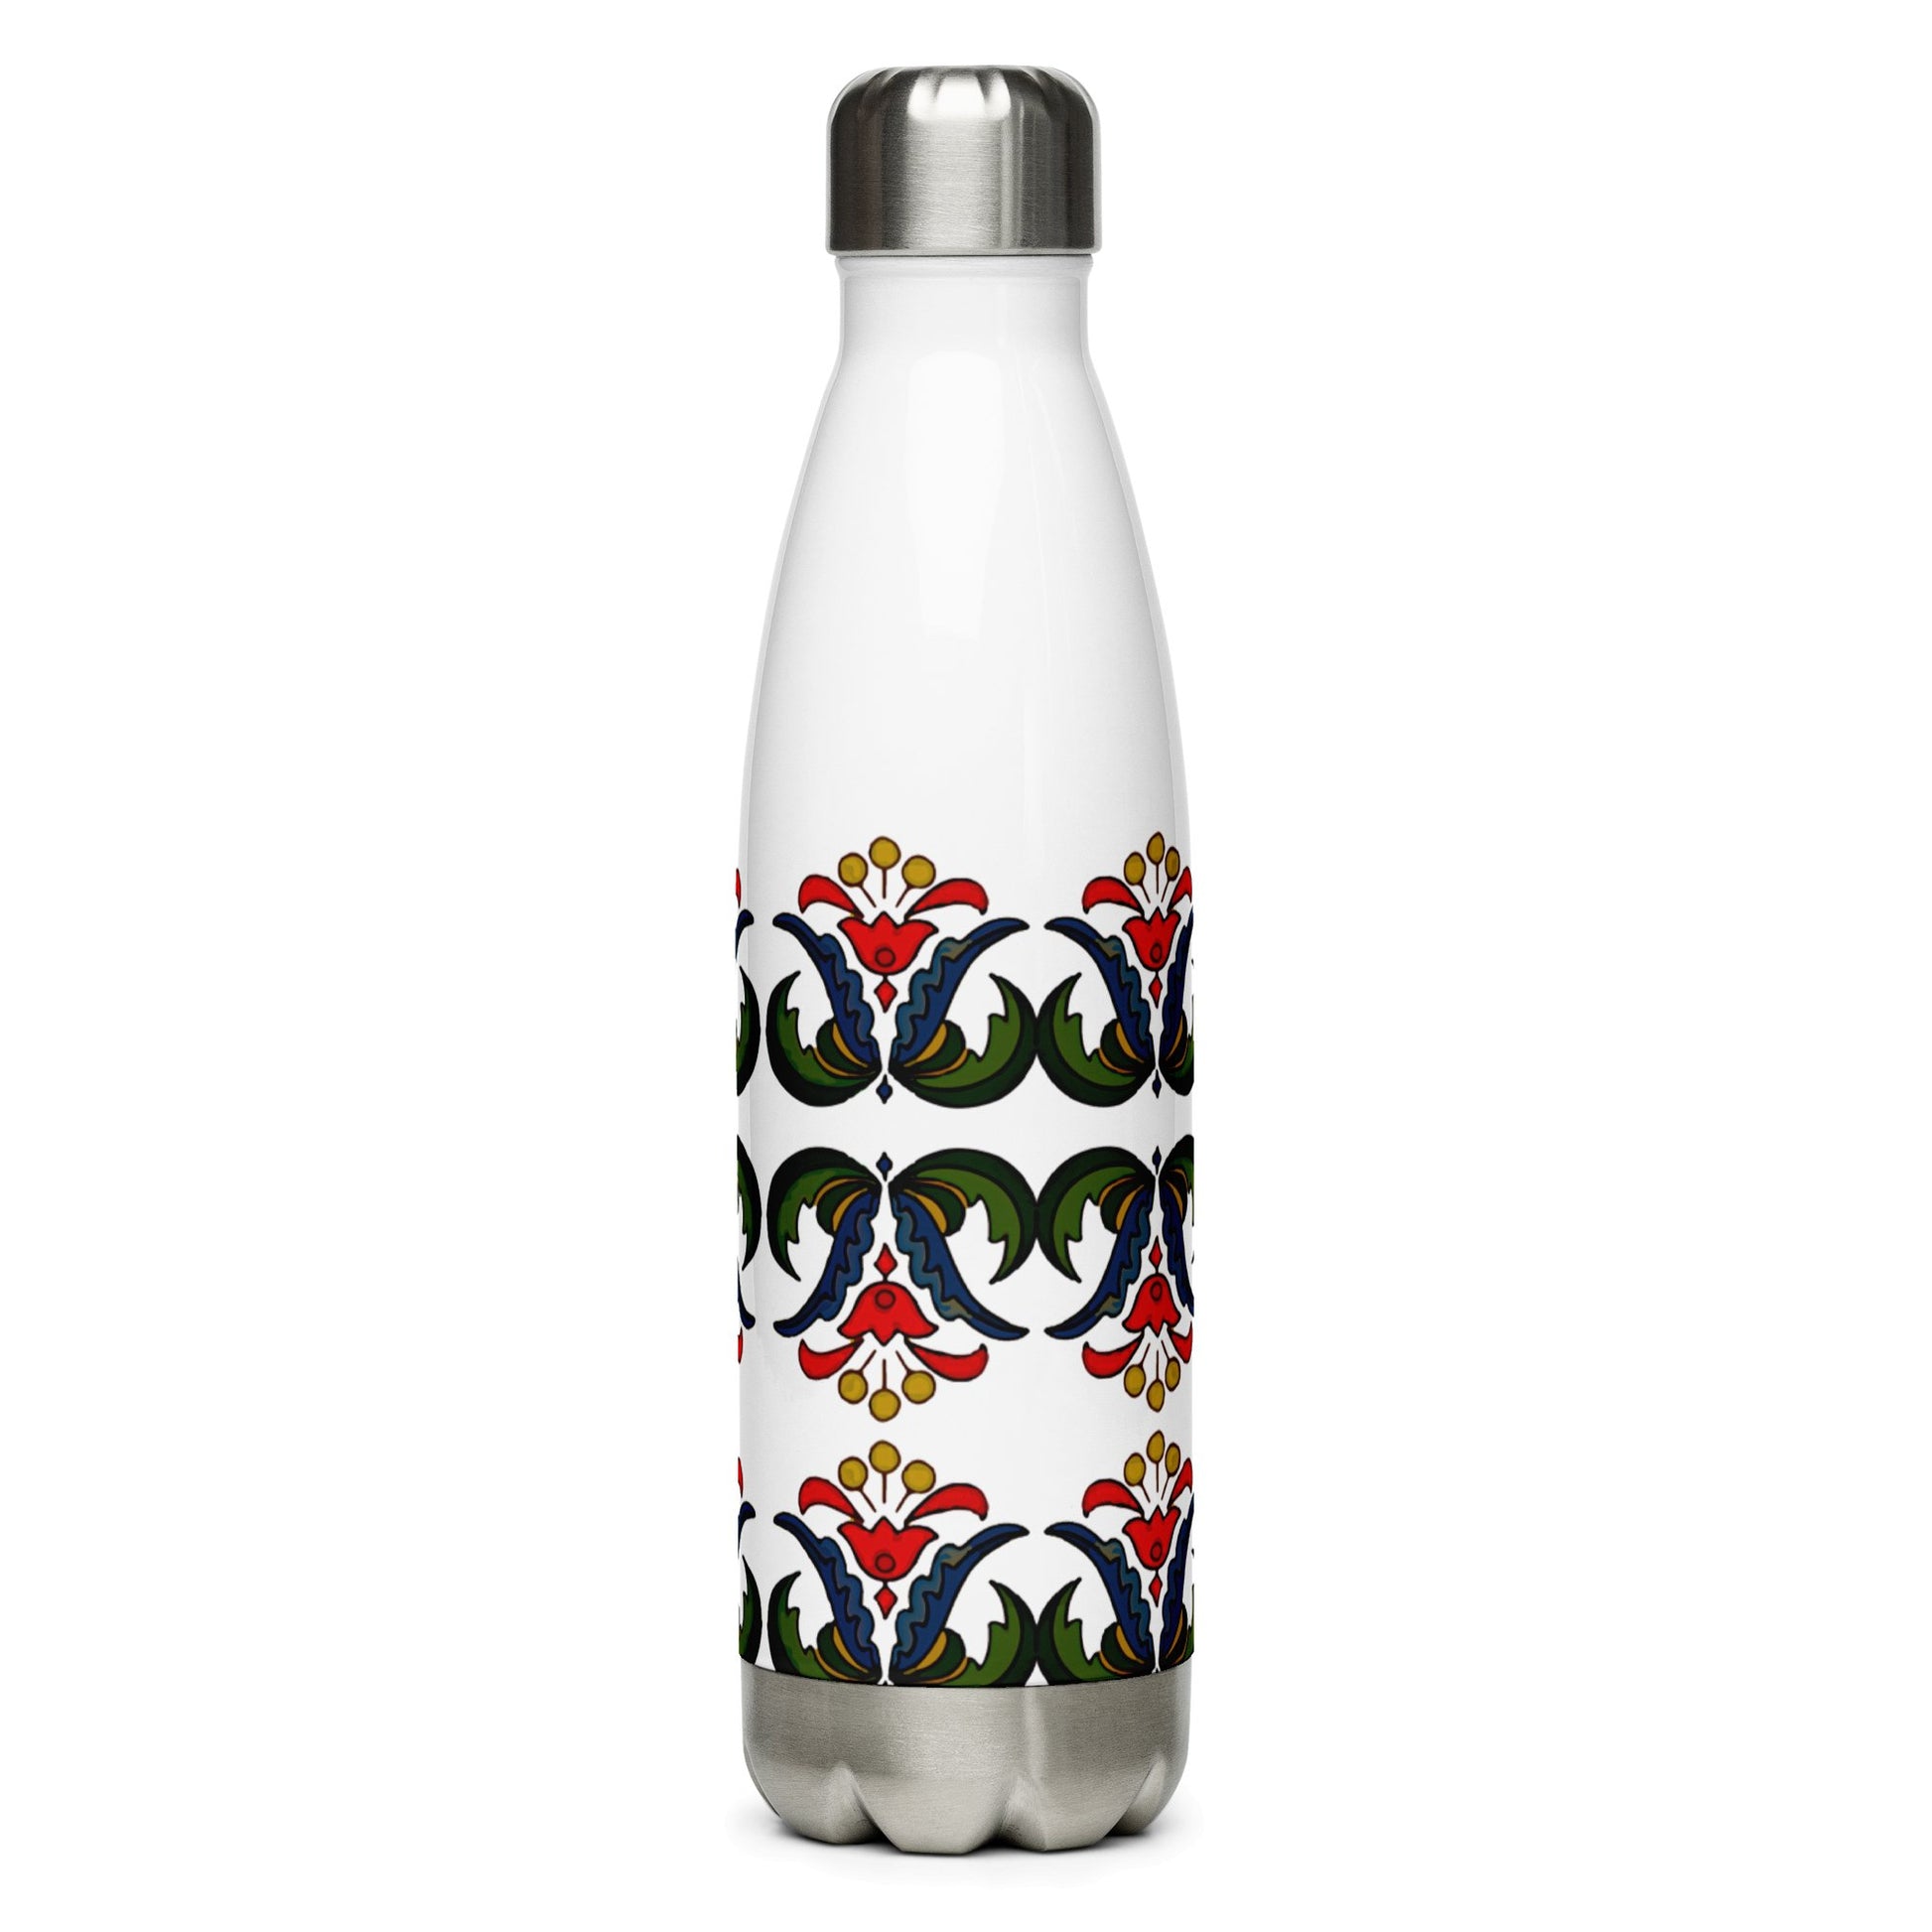 Szur Embroidery Design All Gender Stainless Steel Water Bottle - Fire - Red Rosehip Studio